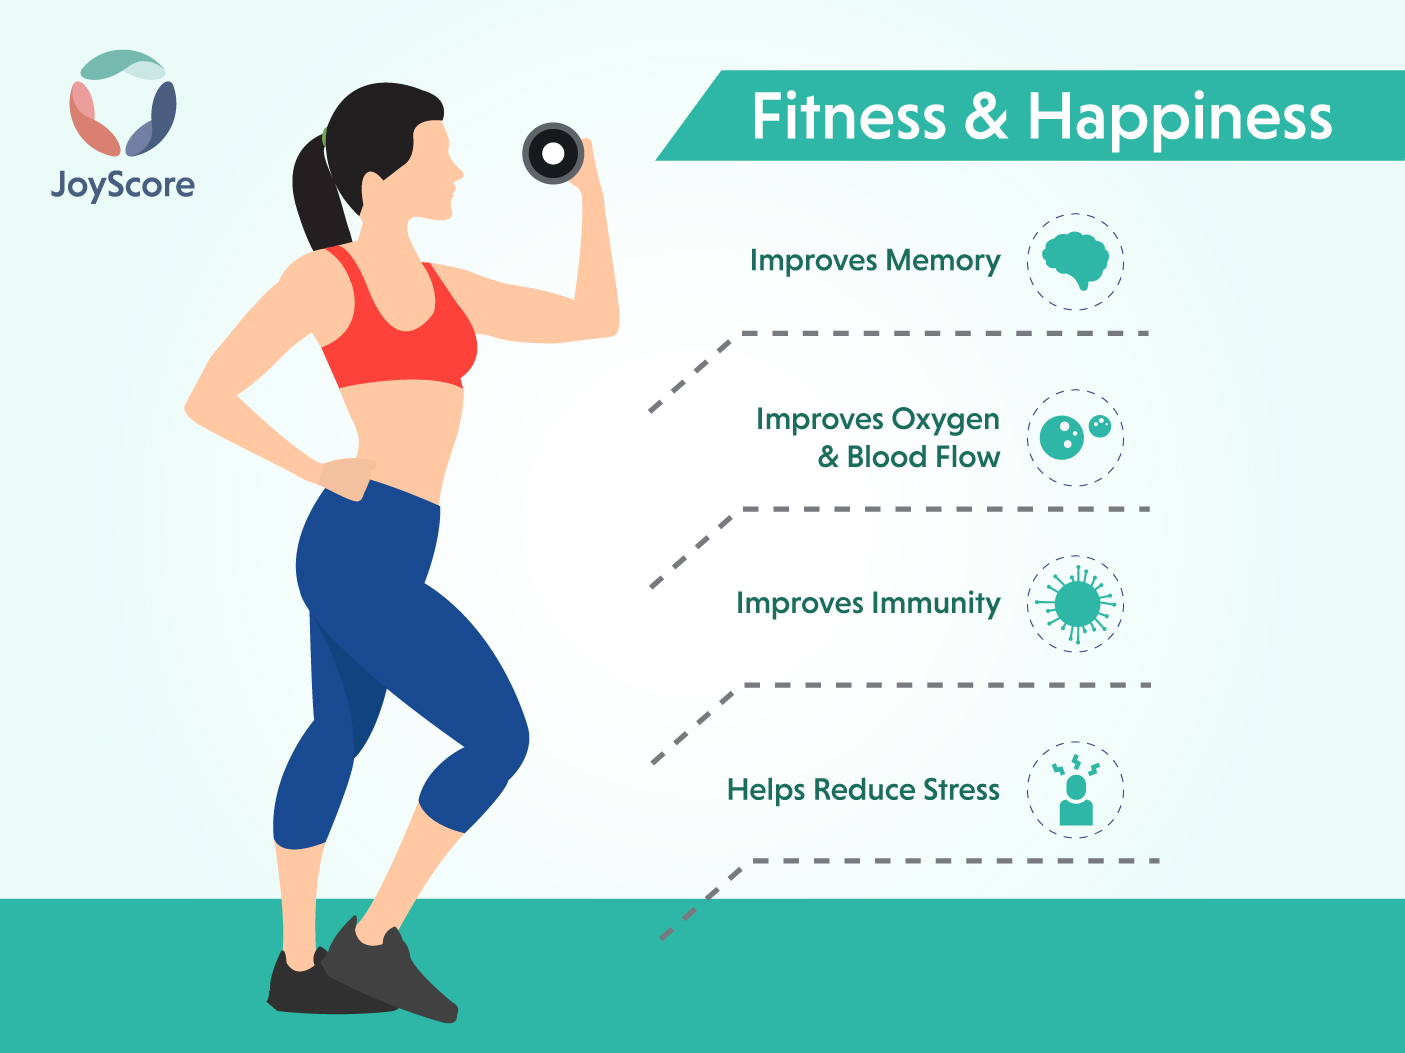 Being Fit Can Contribute To Happiness